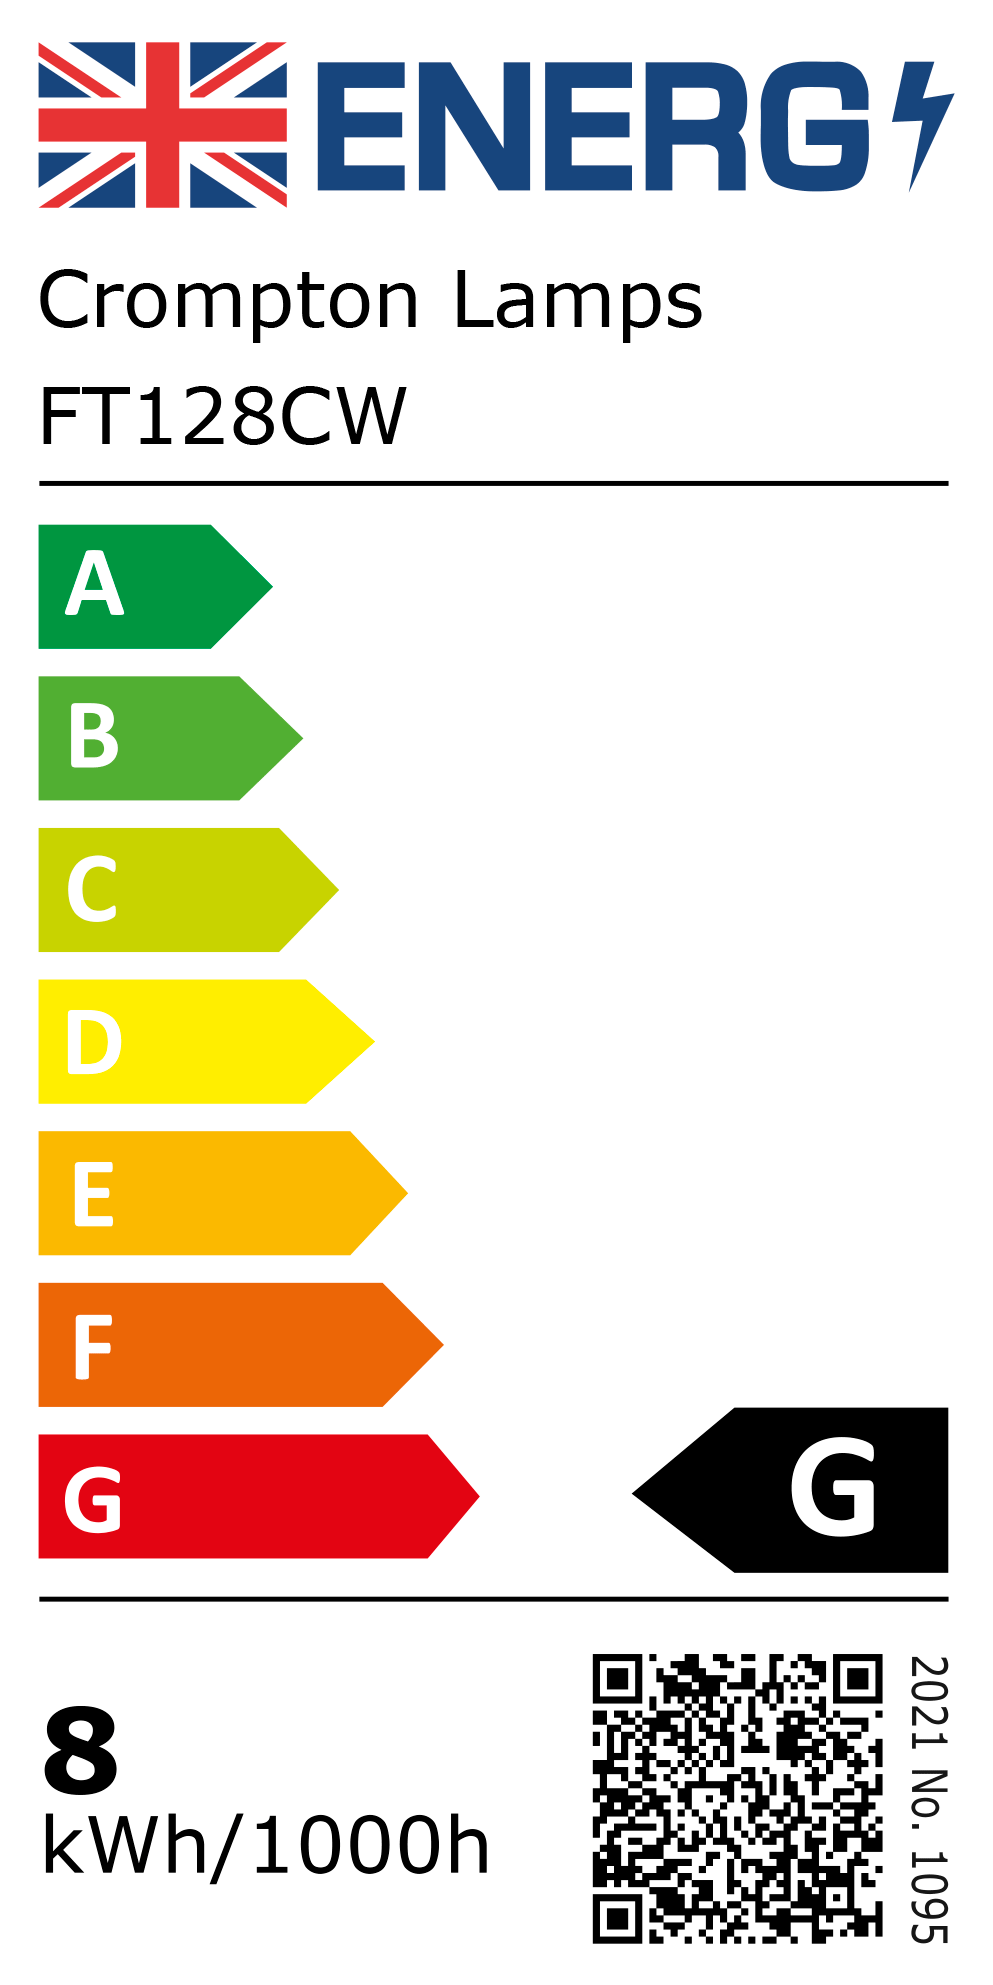 New 2021 Energy Rating Label: Stock Code FT128CW